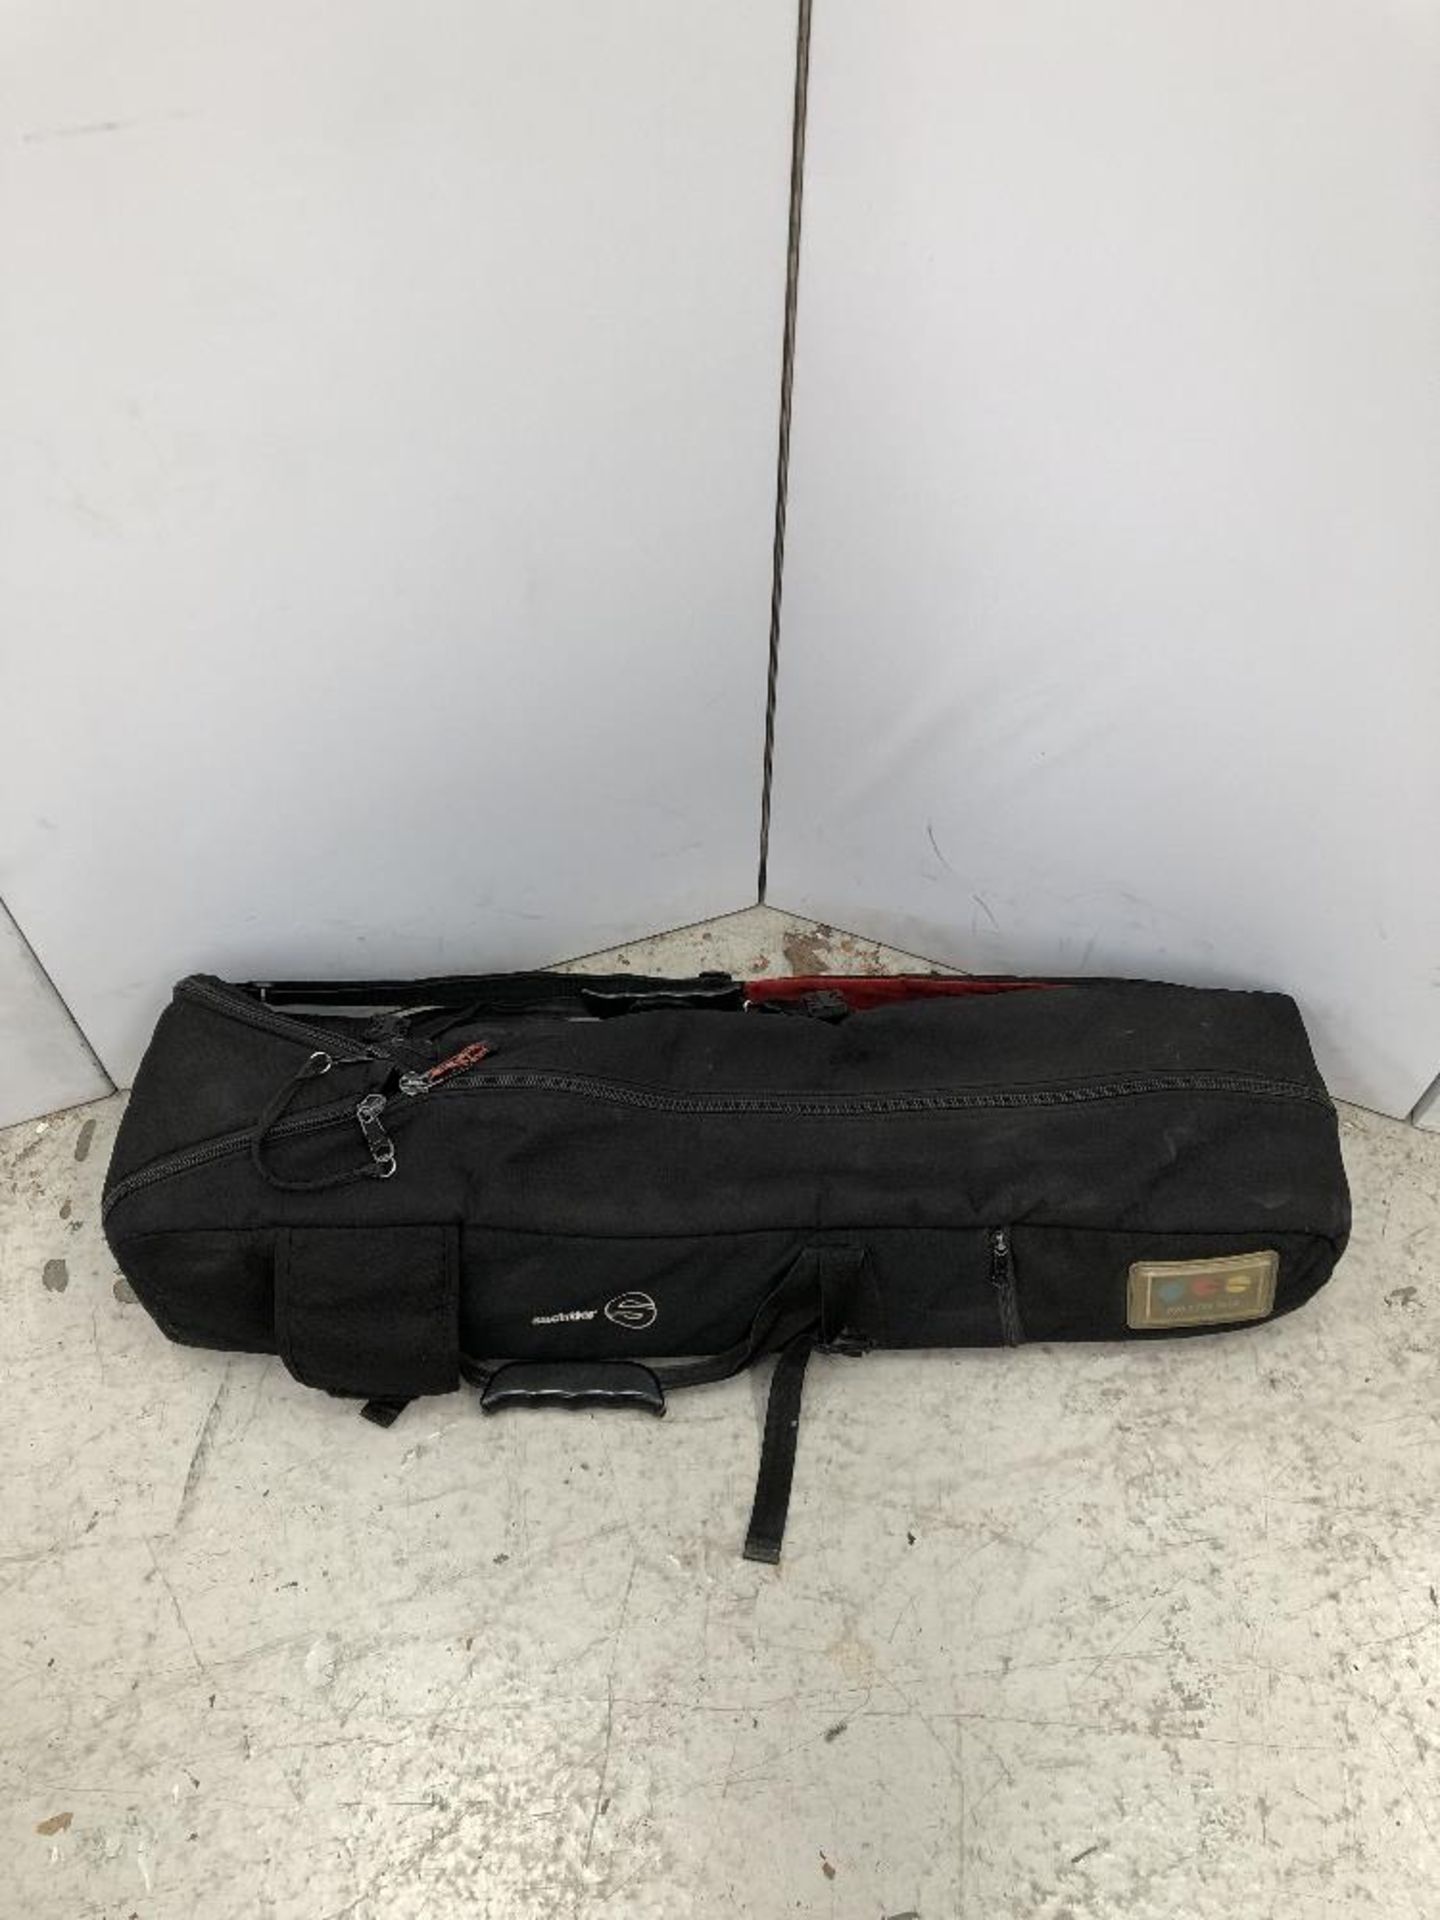 Sachtler Ace M Telescopic Tripod With Fluid head And Carry Bag - Image 6 of 6